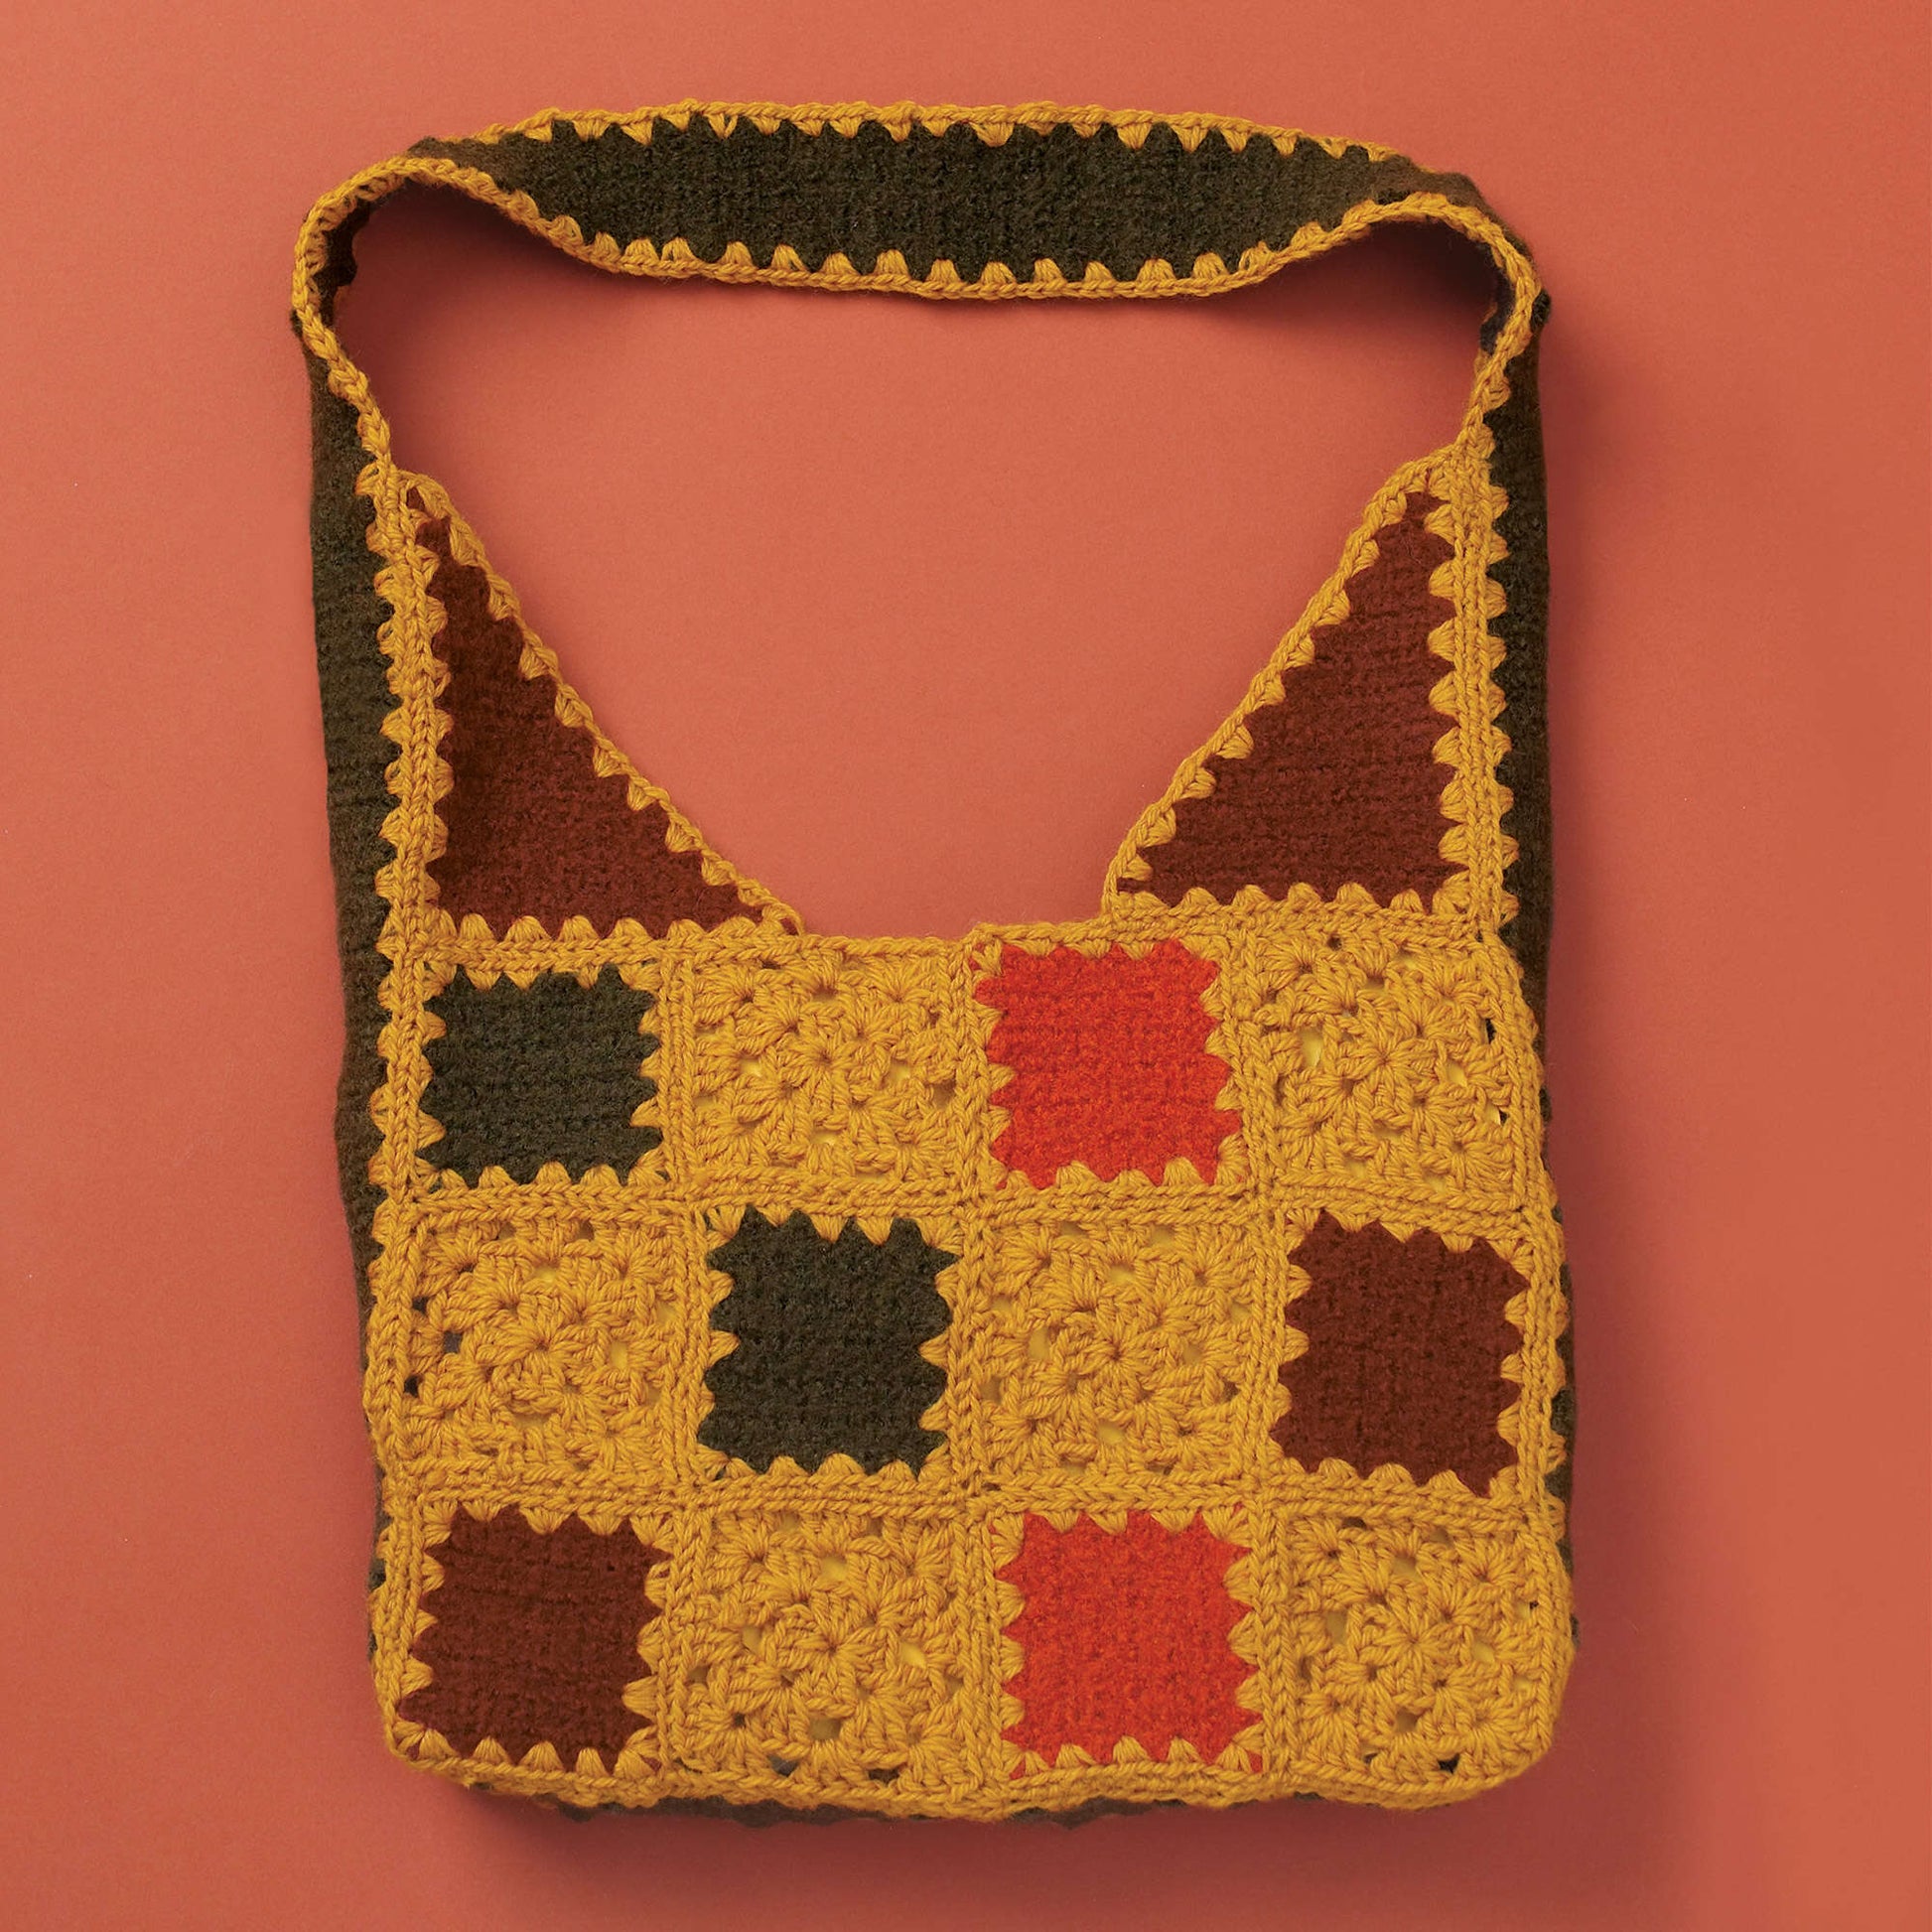 Free Patons Felted & Crochet Patchwork Bag Pattern